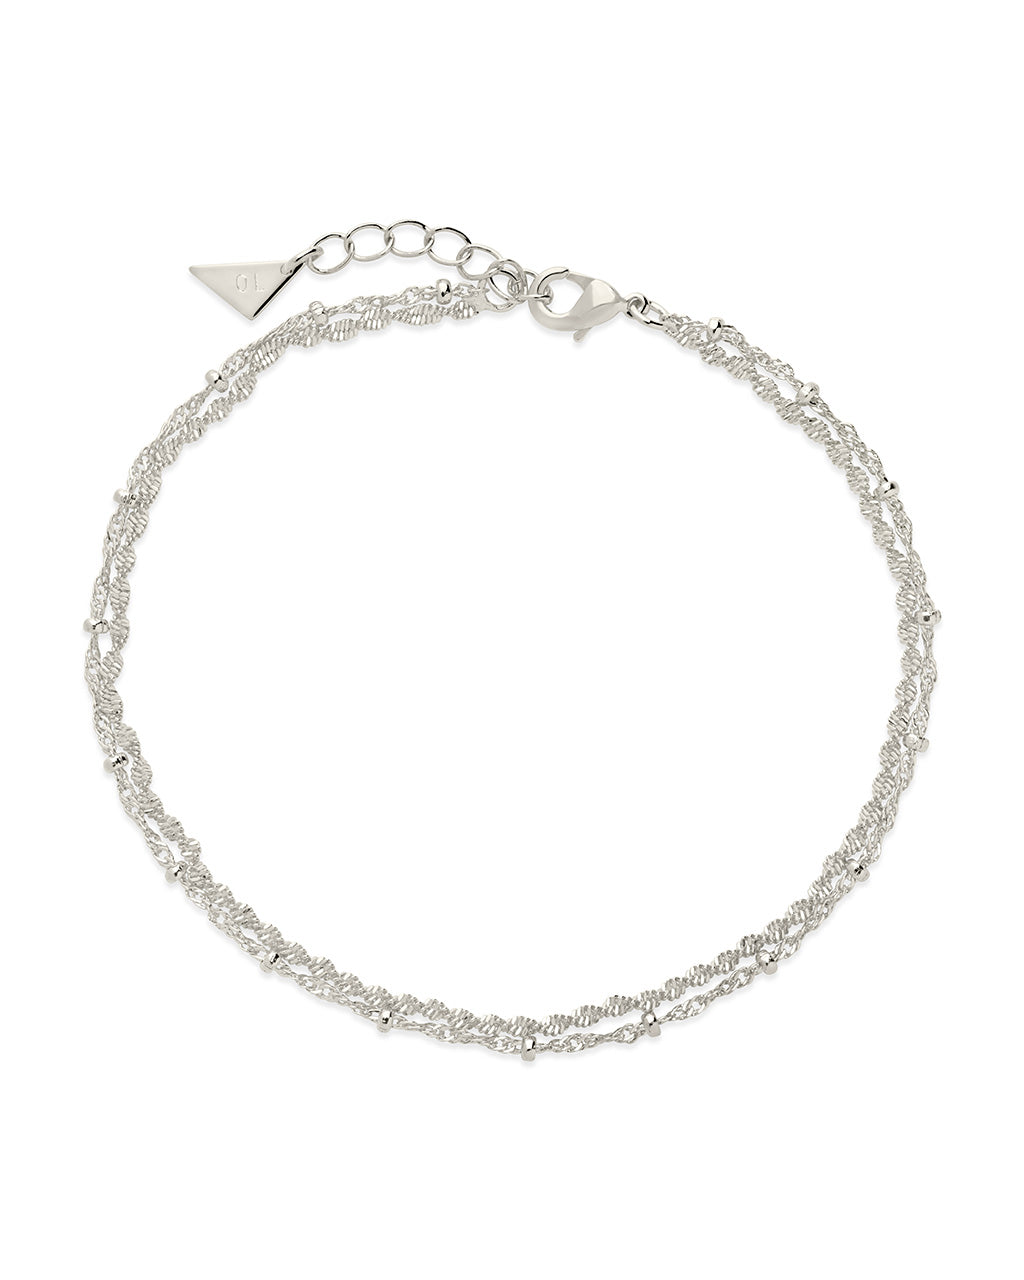 Kyra Layered Chain Anklet Anklet Sterling Forever Silver 